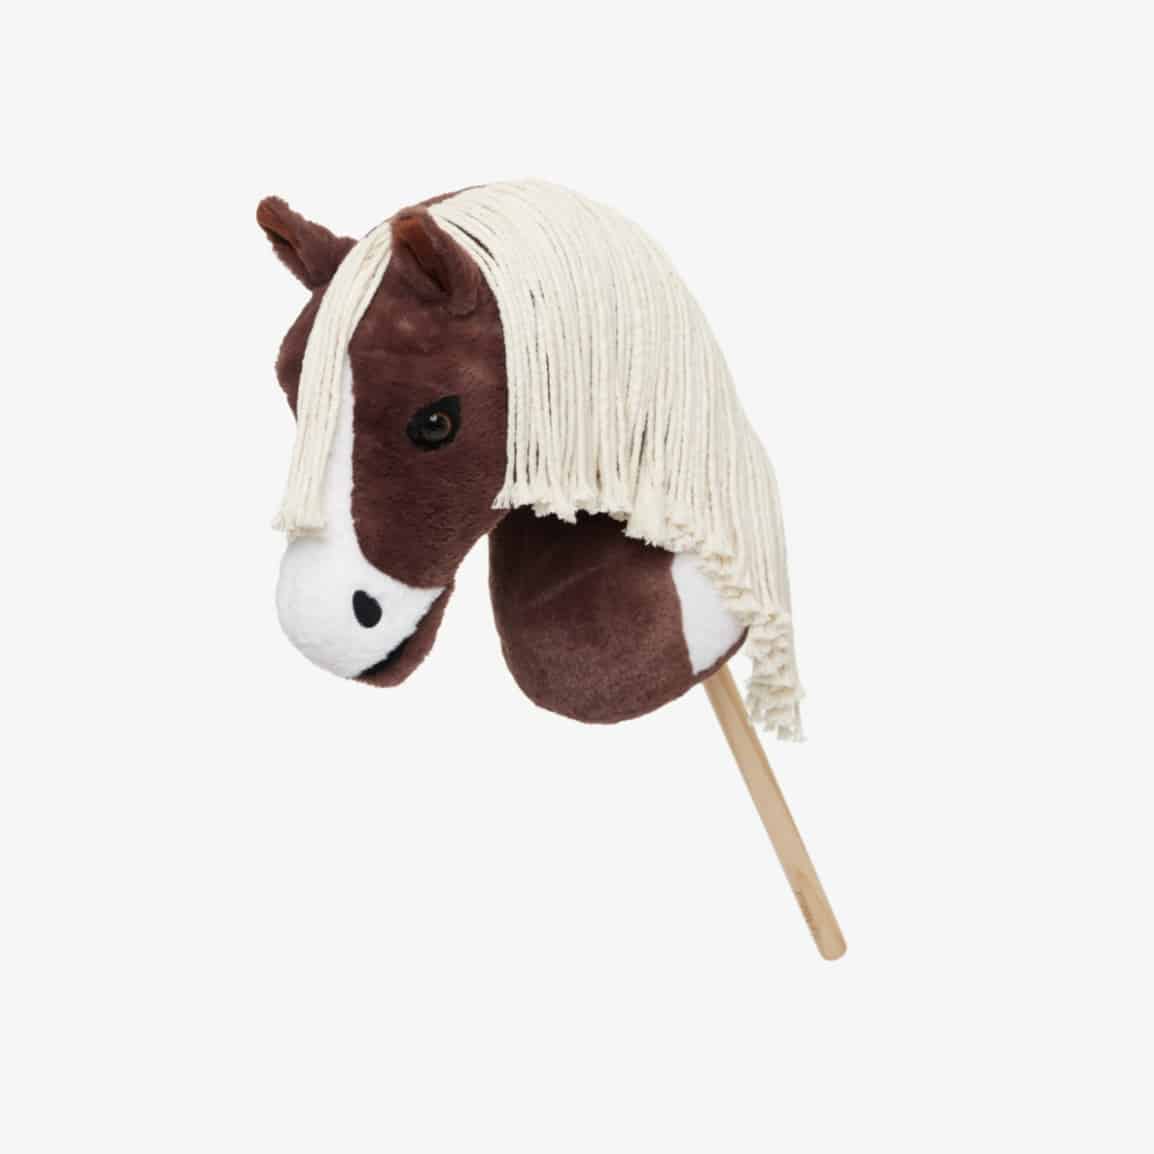 Horse Accessories - View All Tack  Hobby Horse Clothing Company Inc.